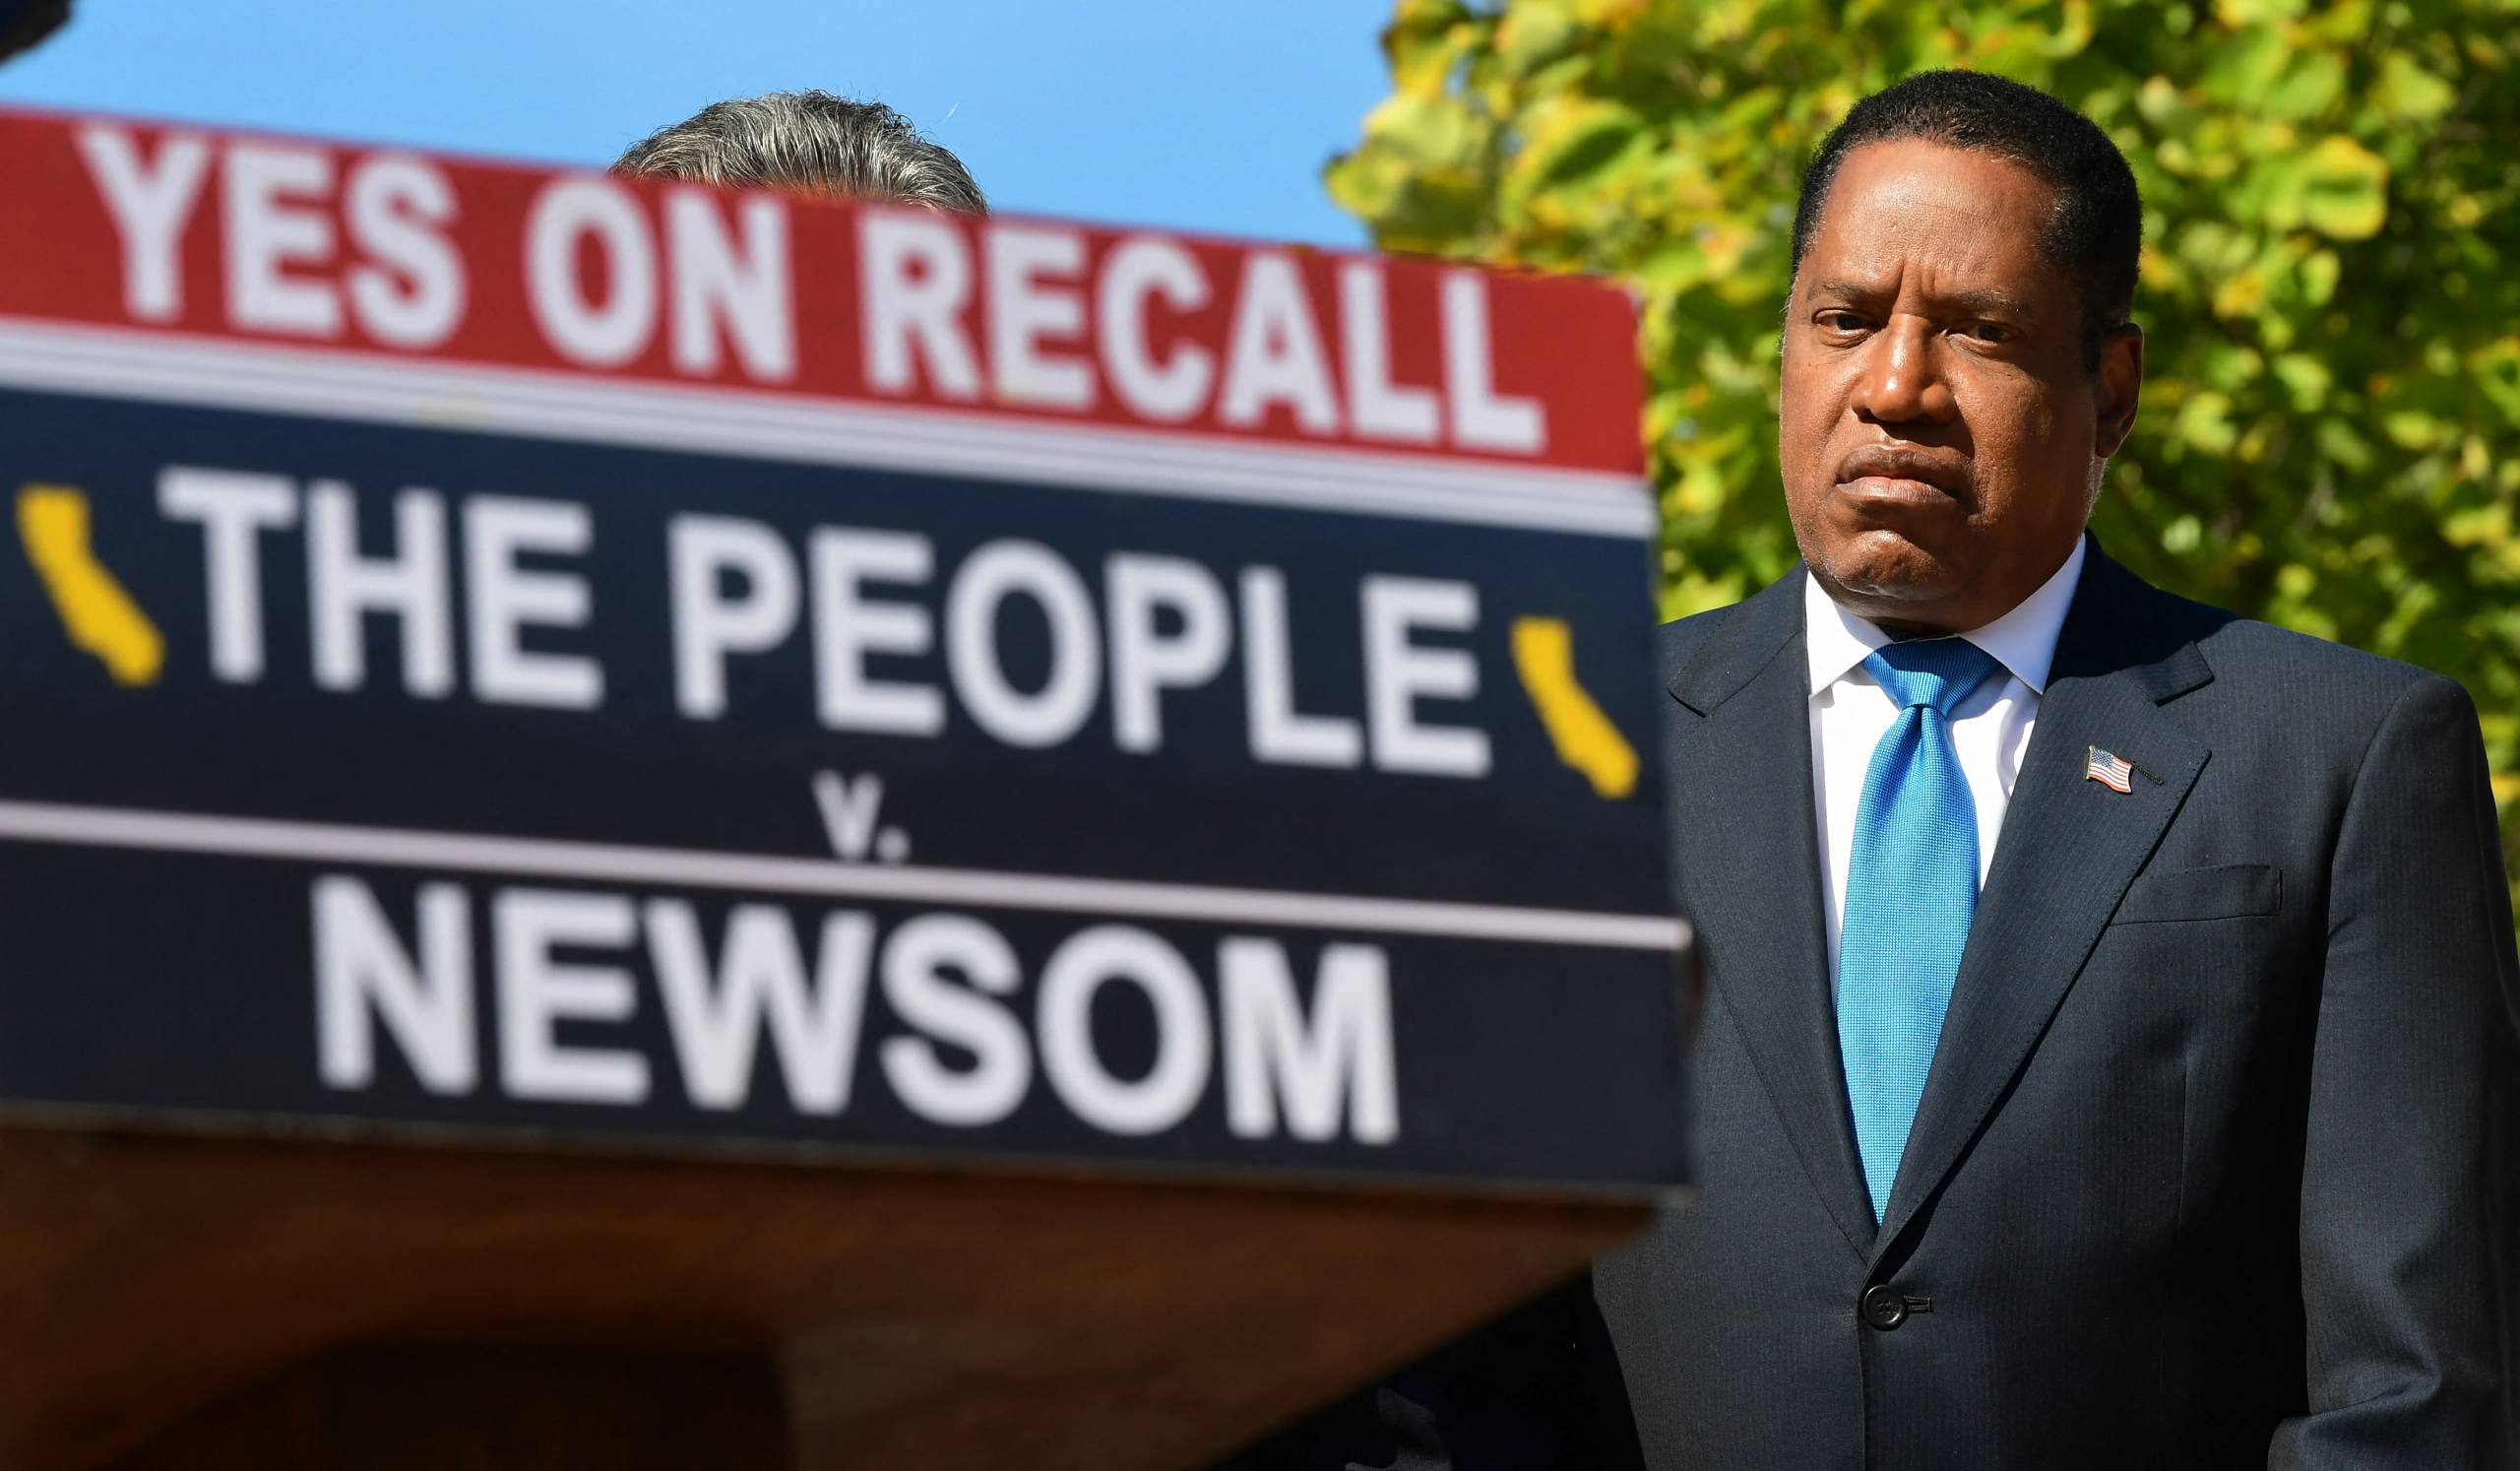 Larry Elder stands near a podium sign that reads, "Yes on Recall, The People v. Newsom."